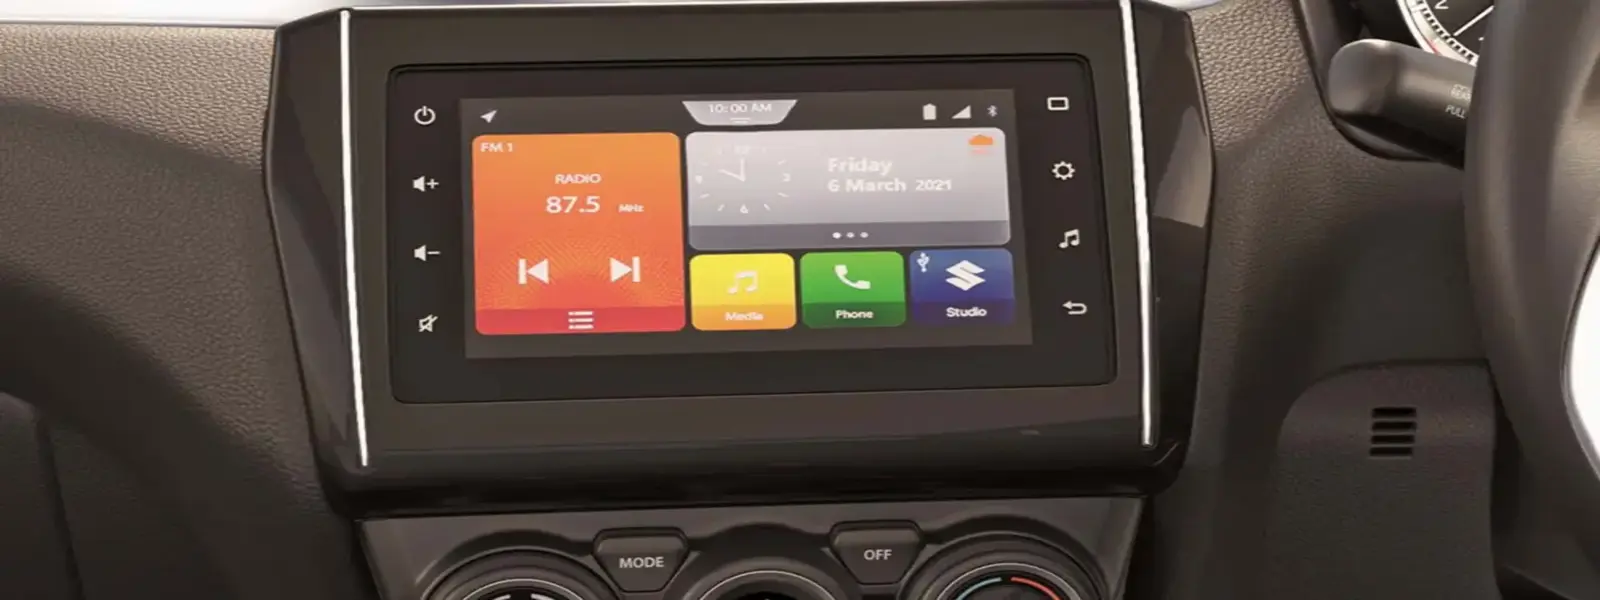 Swift- SmartPlay Infotainment System Competent Automobiles Islampur, Gurgaon